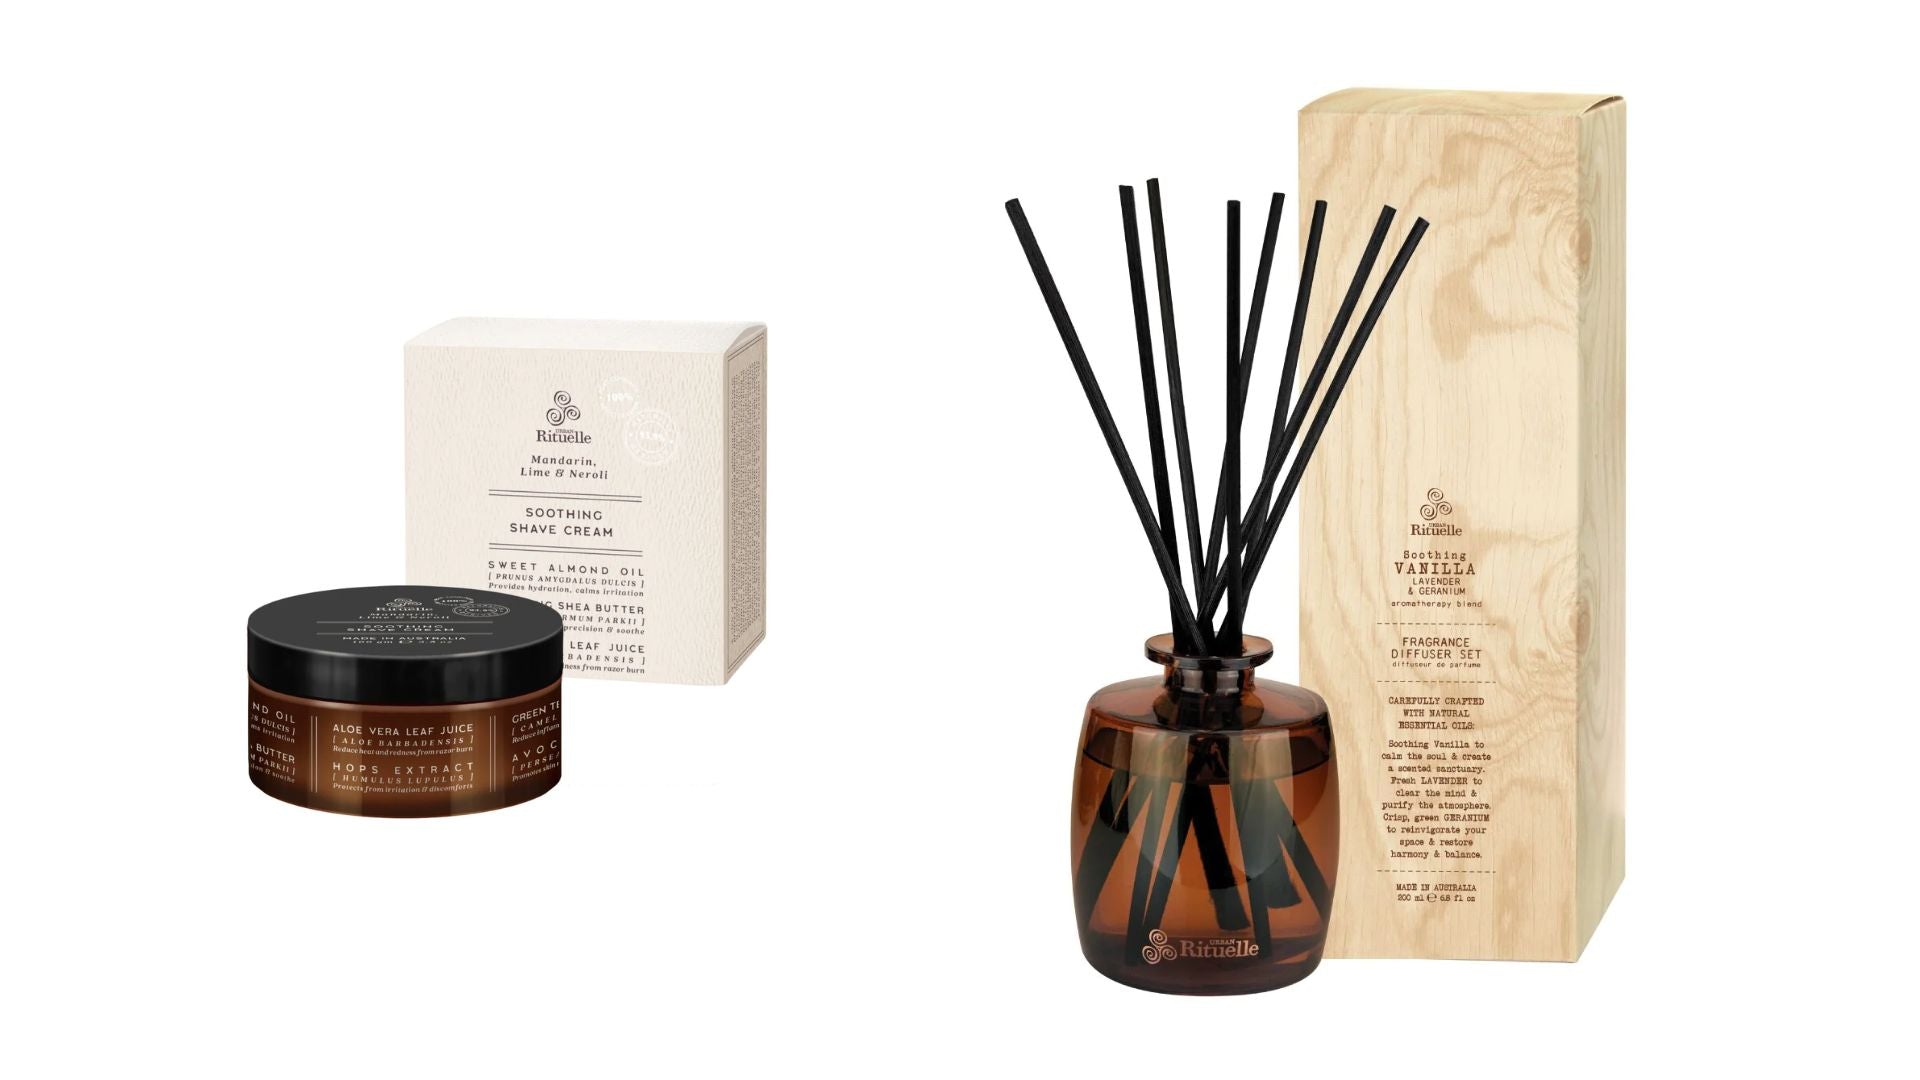 Urban Rituelle Products